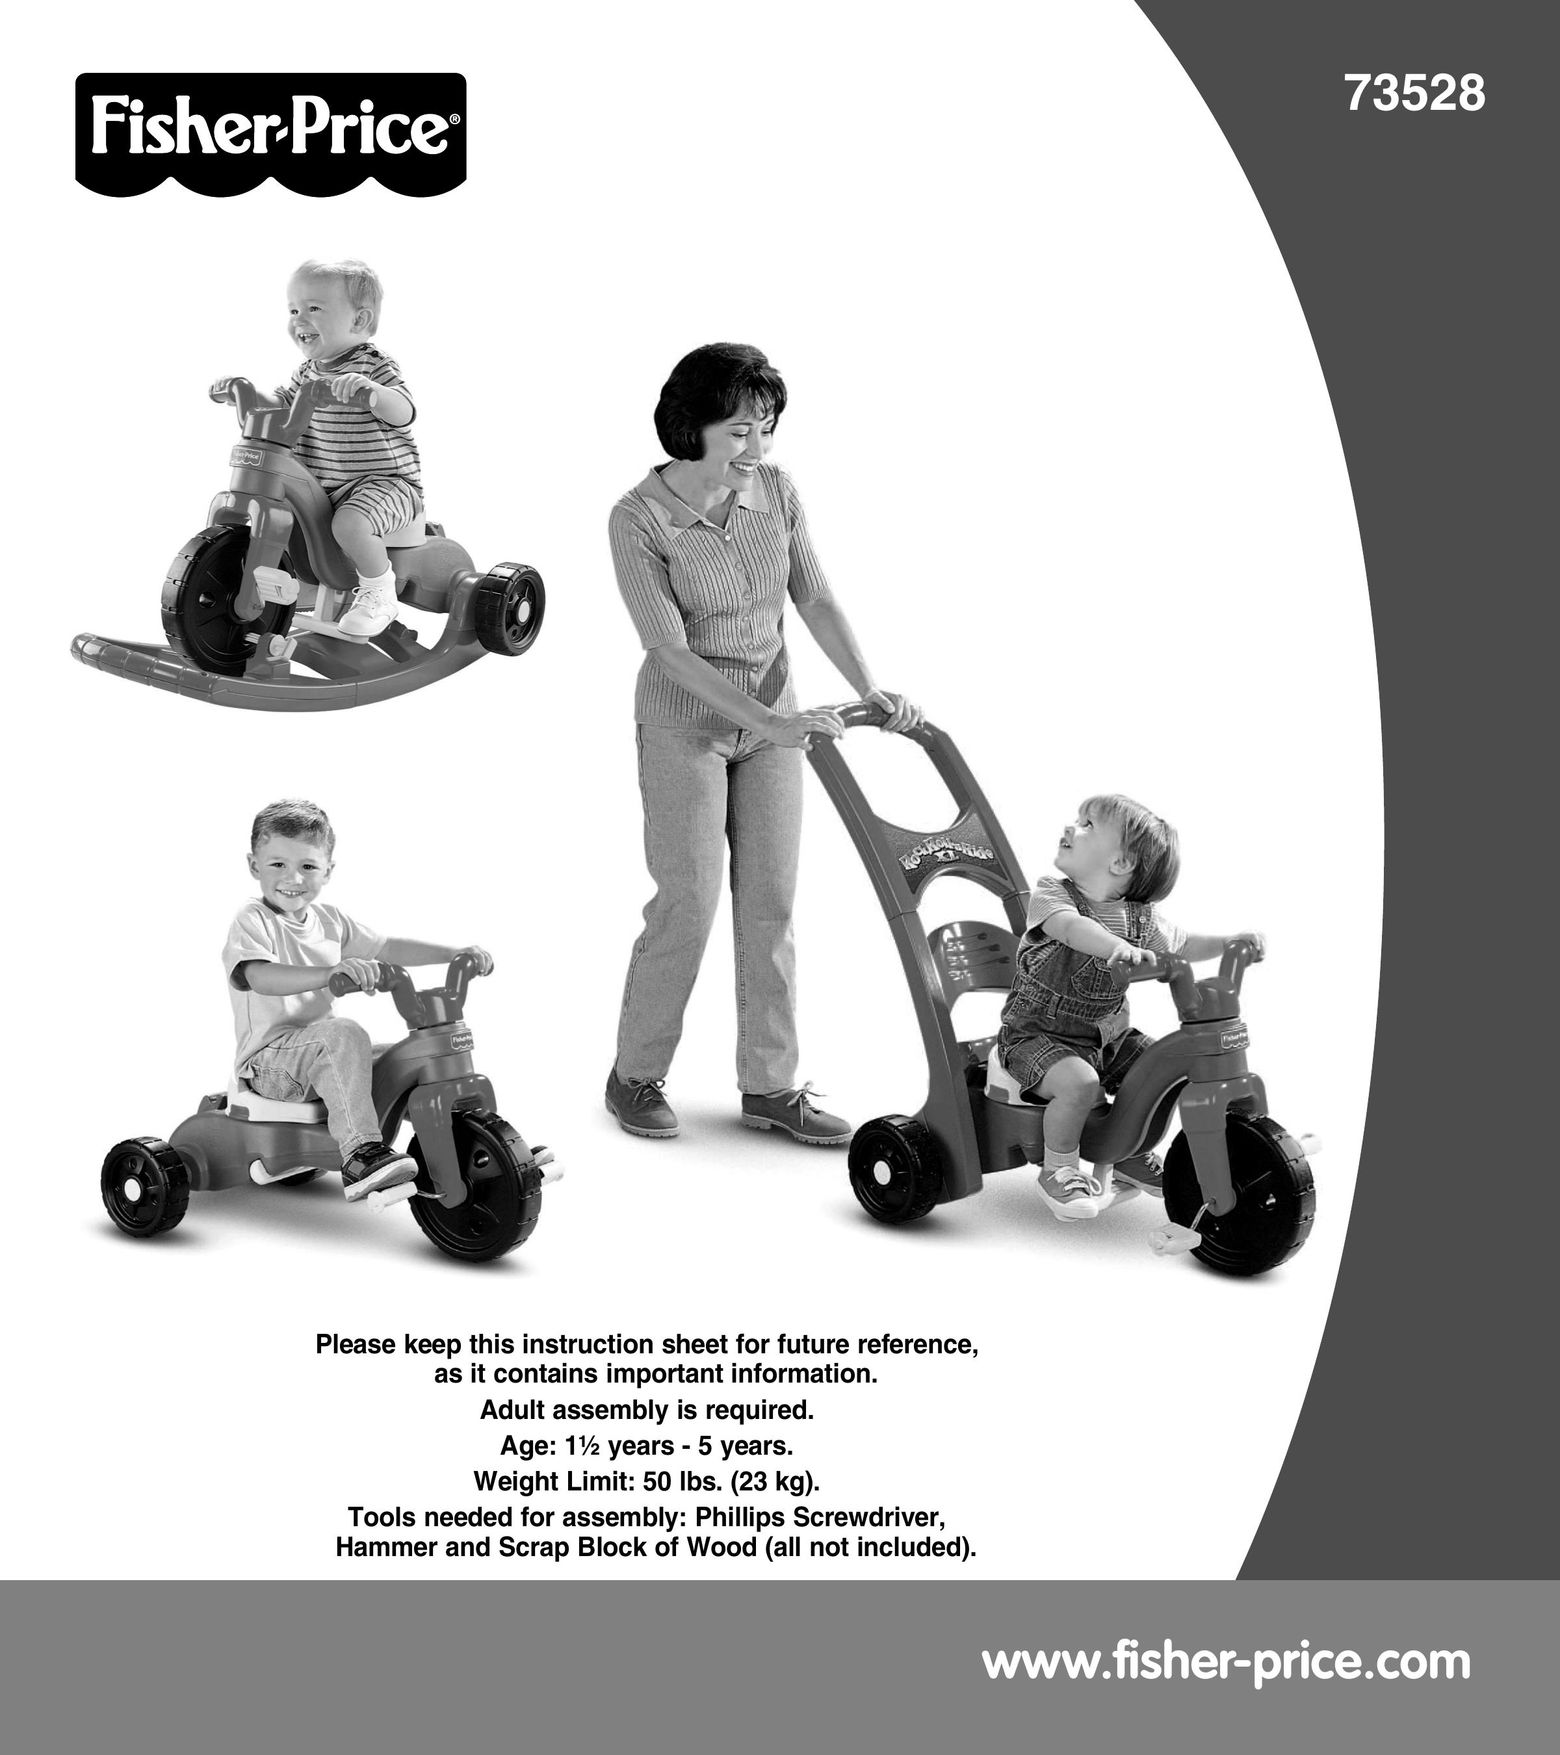 Fisher-Price 73528 Riding Toy User Manual